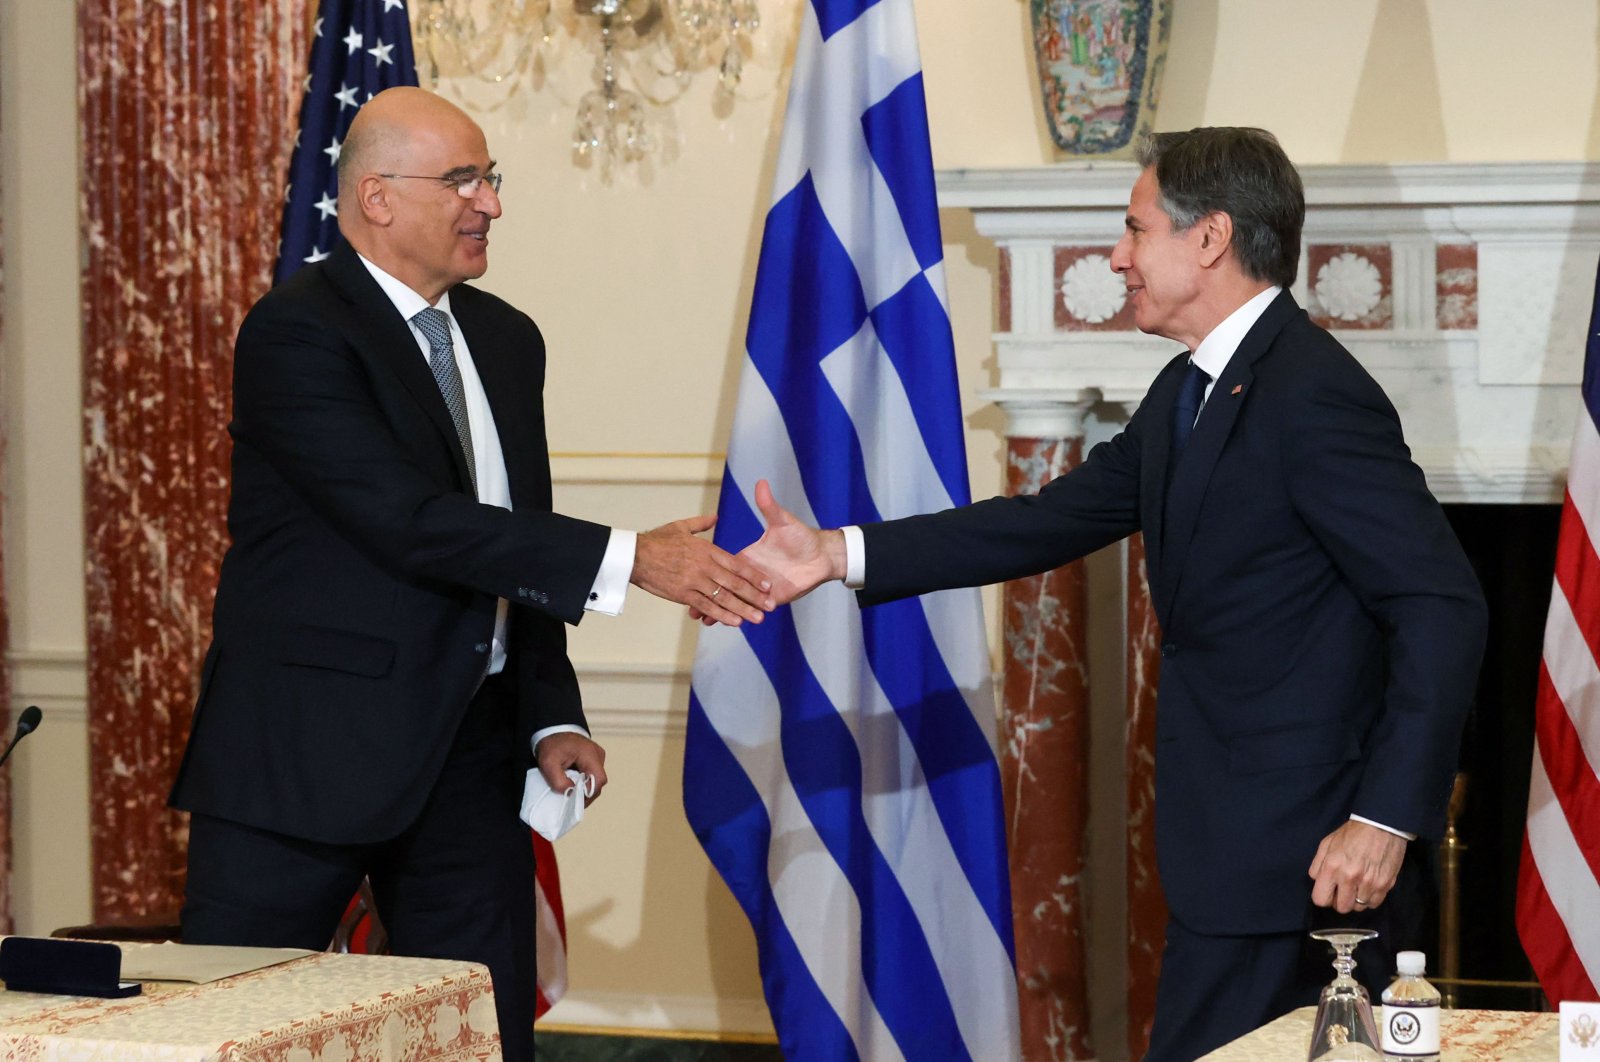 U.S. Secretary of State Antony Blinken (R) and Greek Foreign Minister Nikos Dendias shake hands after signing the renewal of the U.S.-Greece Mutual Defense Cooperation Agreement at the State Department in Washington, D.C., Oct. 14, 2021. (Reuters Photo)